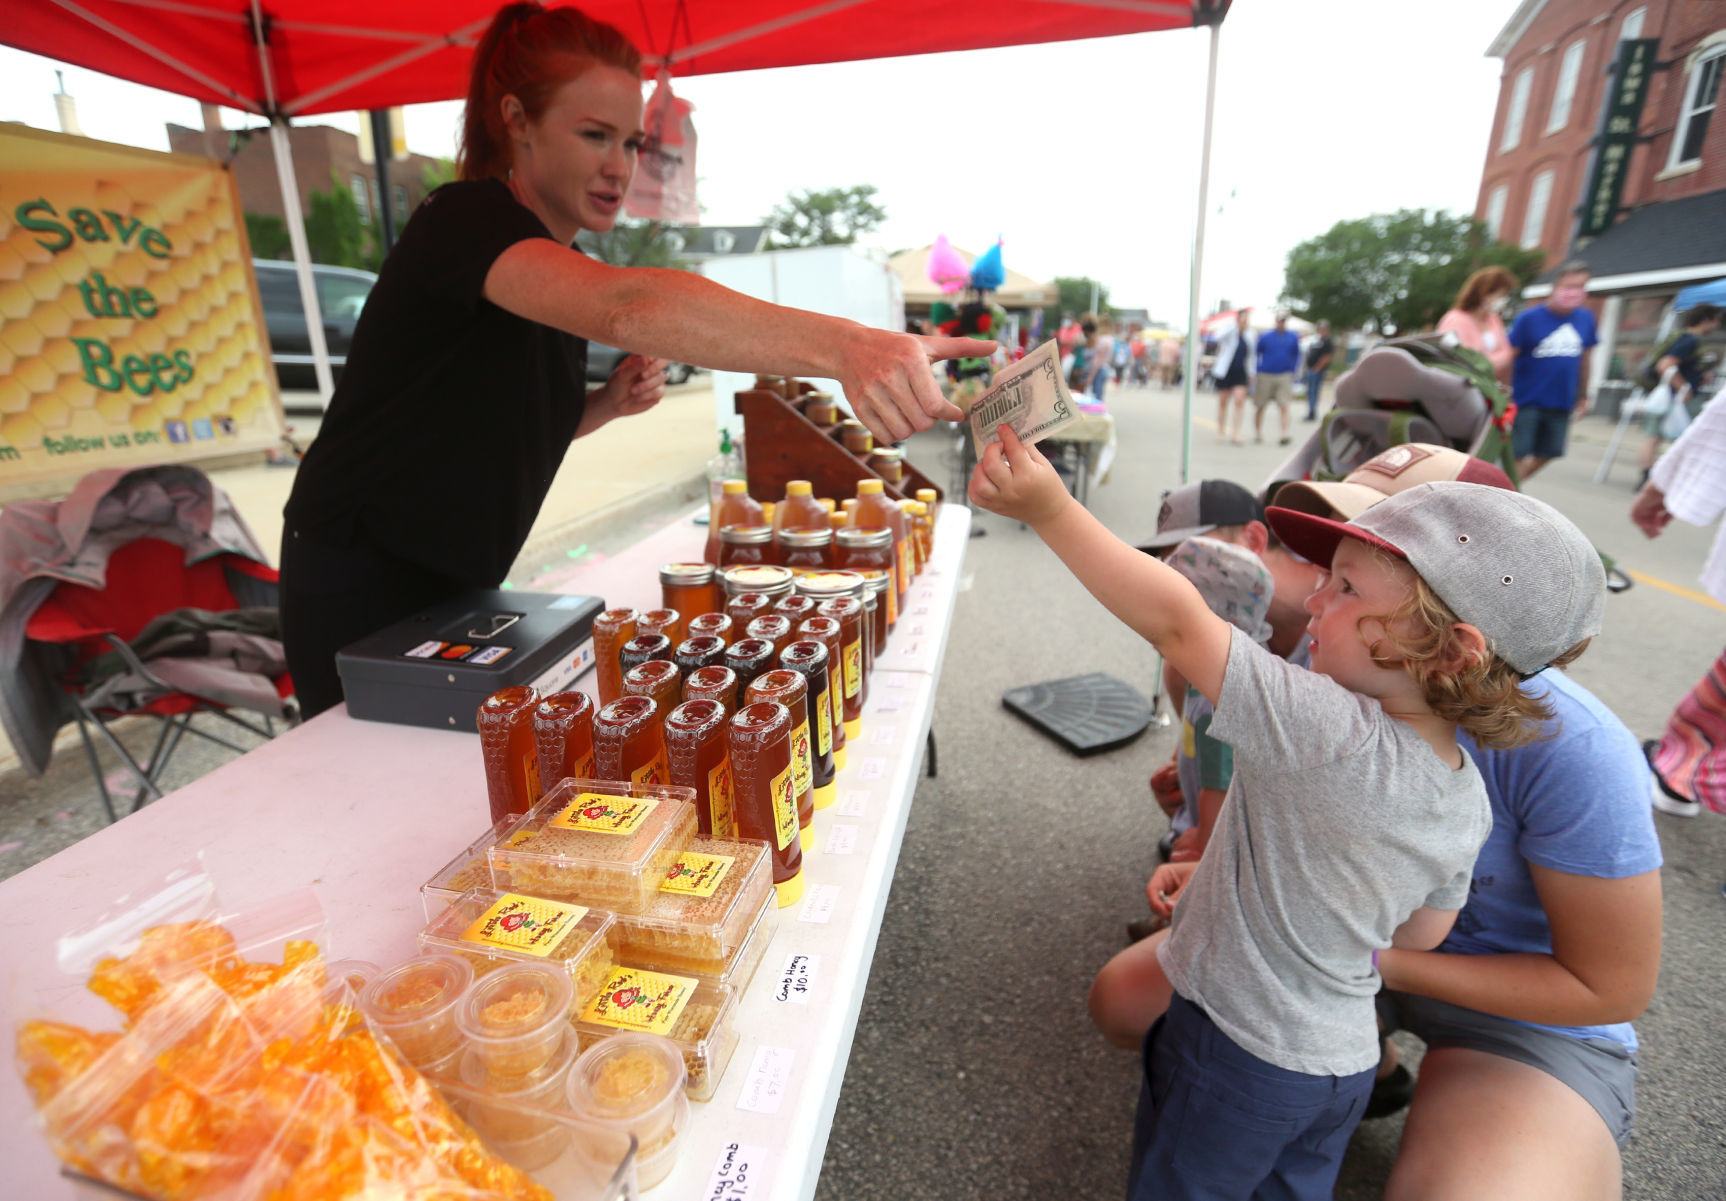 Joy Schultz, with Little Red’s Honey Farm in Reedsburg, Wis., takes money from Lexton Moeller, and his mom, Kaytlan Moeller, both of Asbury, Iowa, during Dubuque Farmers Market in downtown Dubuque on Saturday. PHOTO CREDIT: JESSICA REILLY